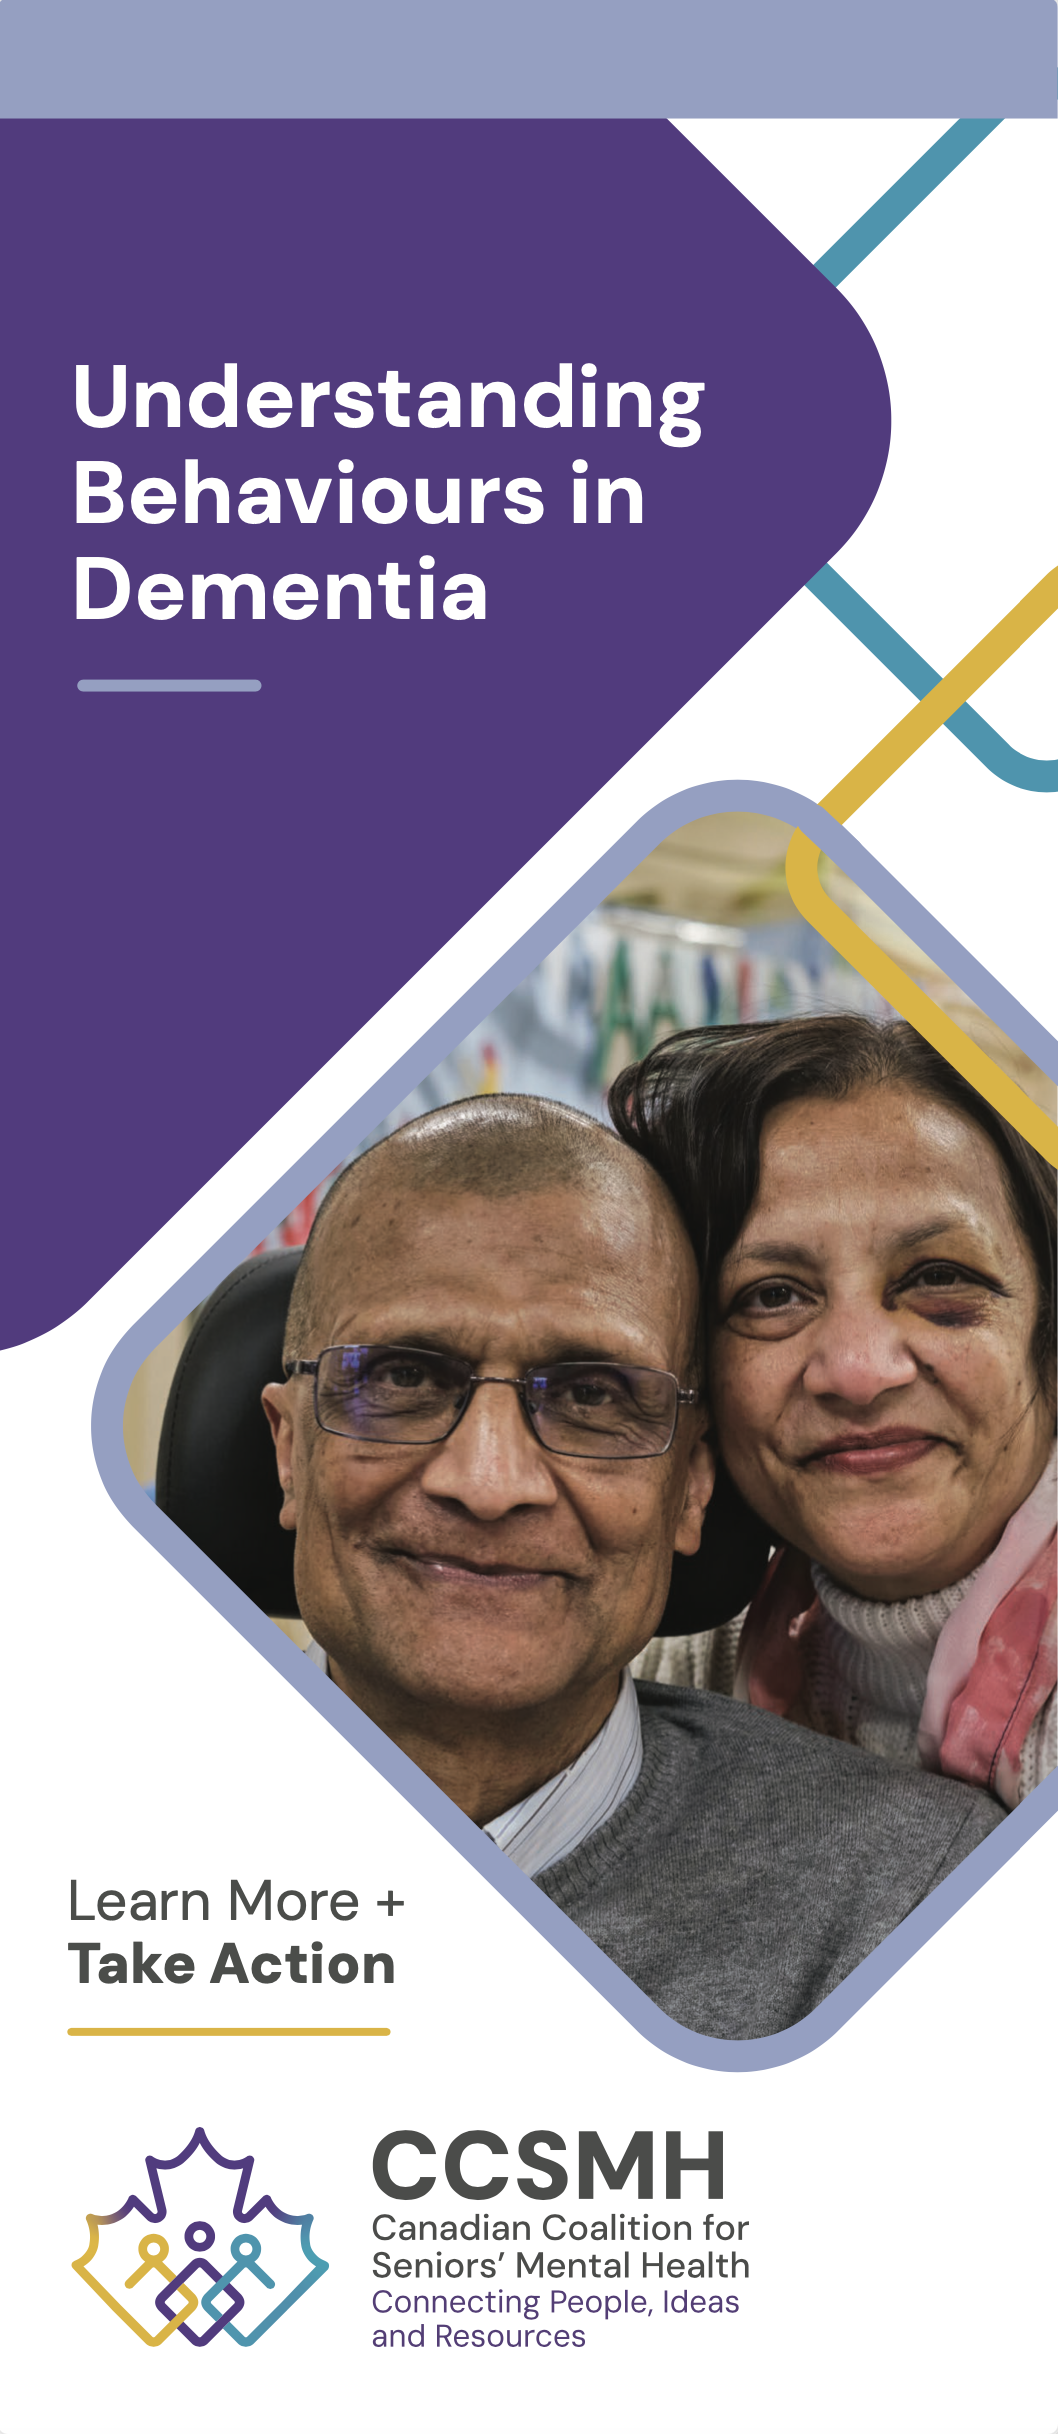 front cover of a brochure with CCSMH branding. there is a large purple diamond coming from the left top corner with white text that reads "Understanding Behaviours in Dementia" There is a large photo of an older man and woman looking at the camera smiling. They have brown skin and the woman has dark hair, the man is bald.